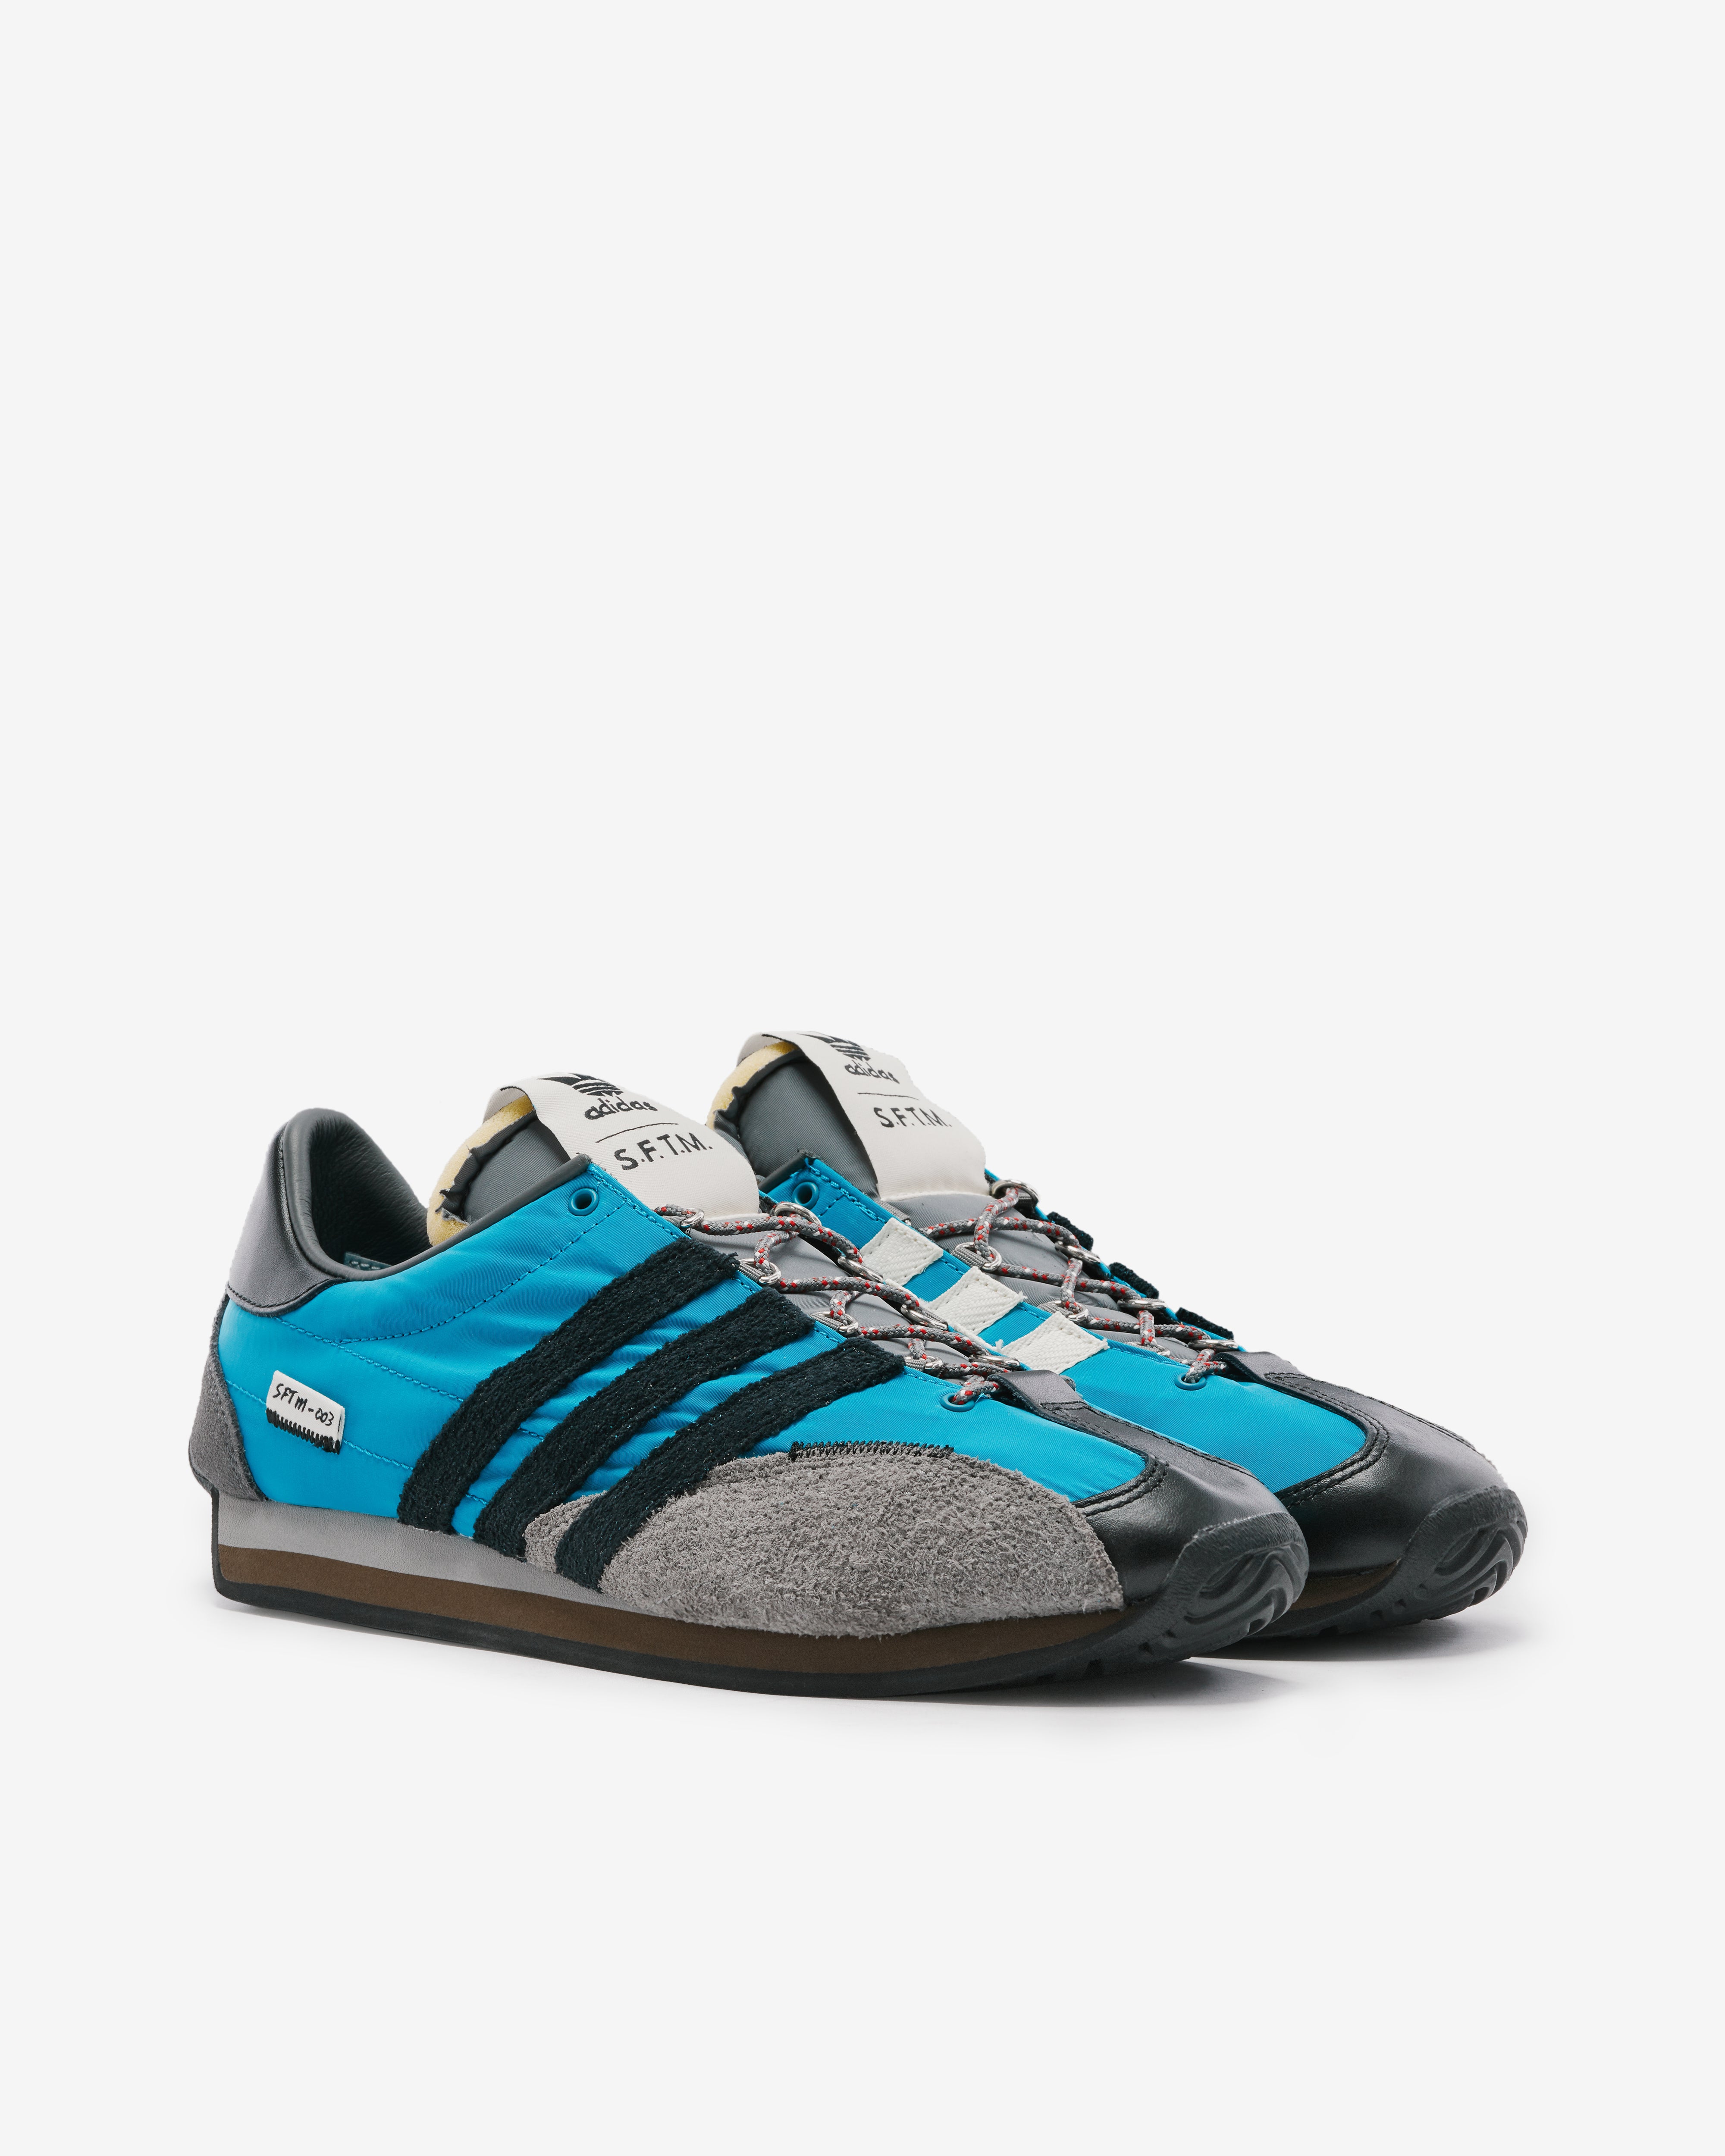 Adidas - Song For The Mute Men's Country OG Low - (Active Teal/Black)